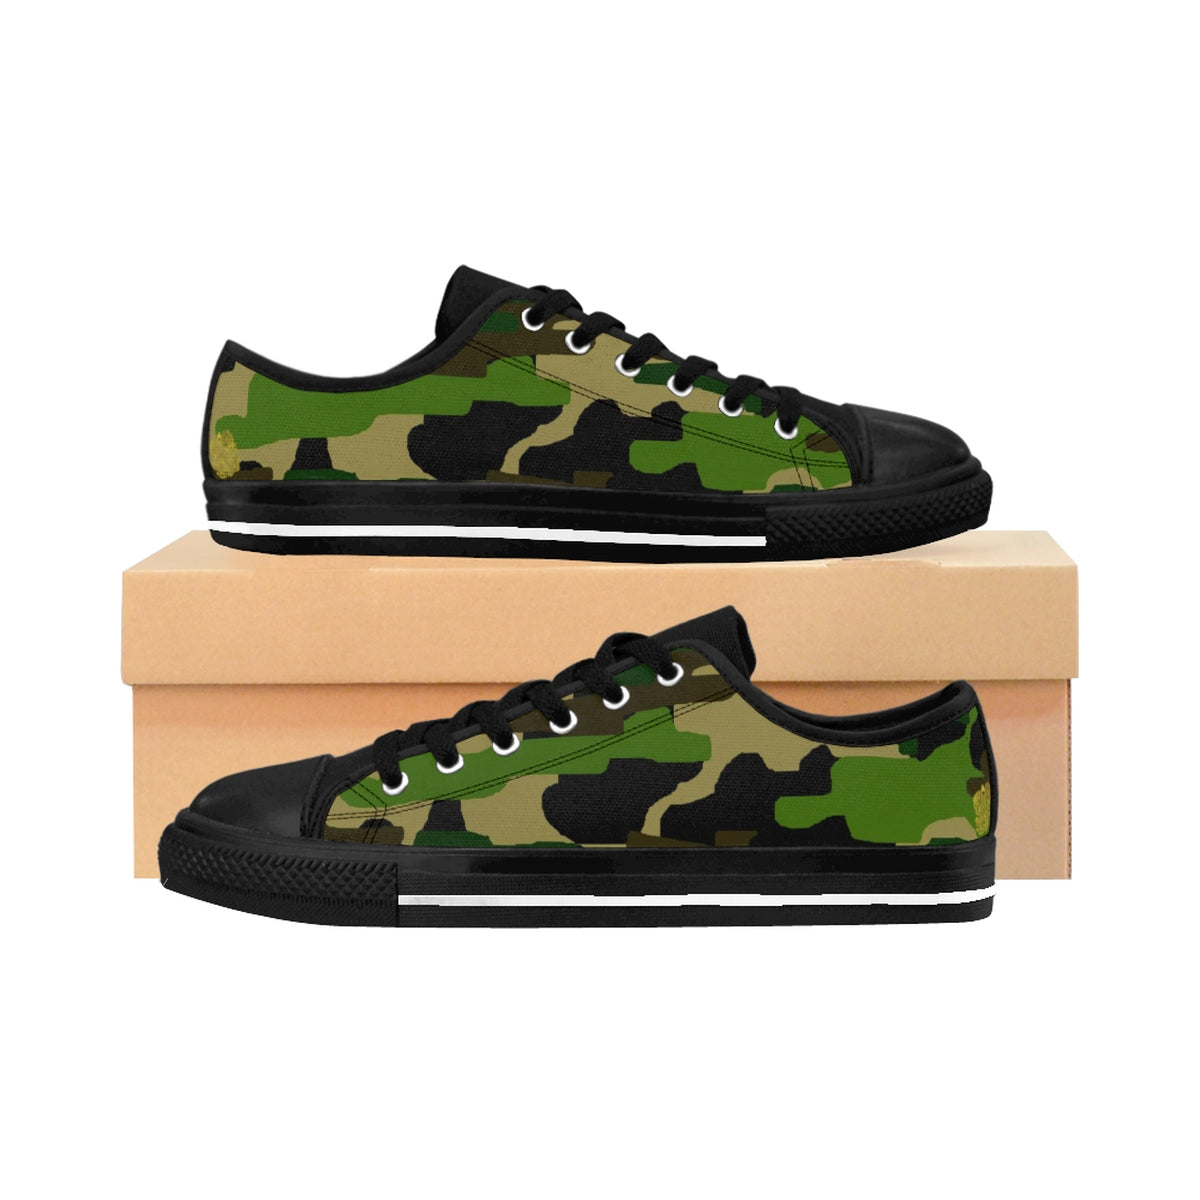 army green tennis shoes